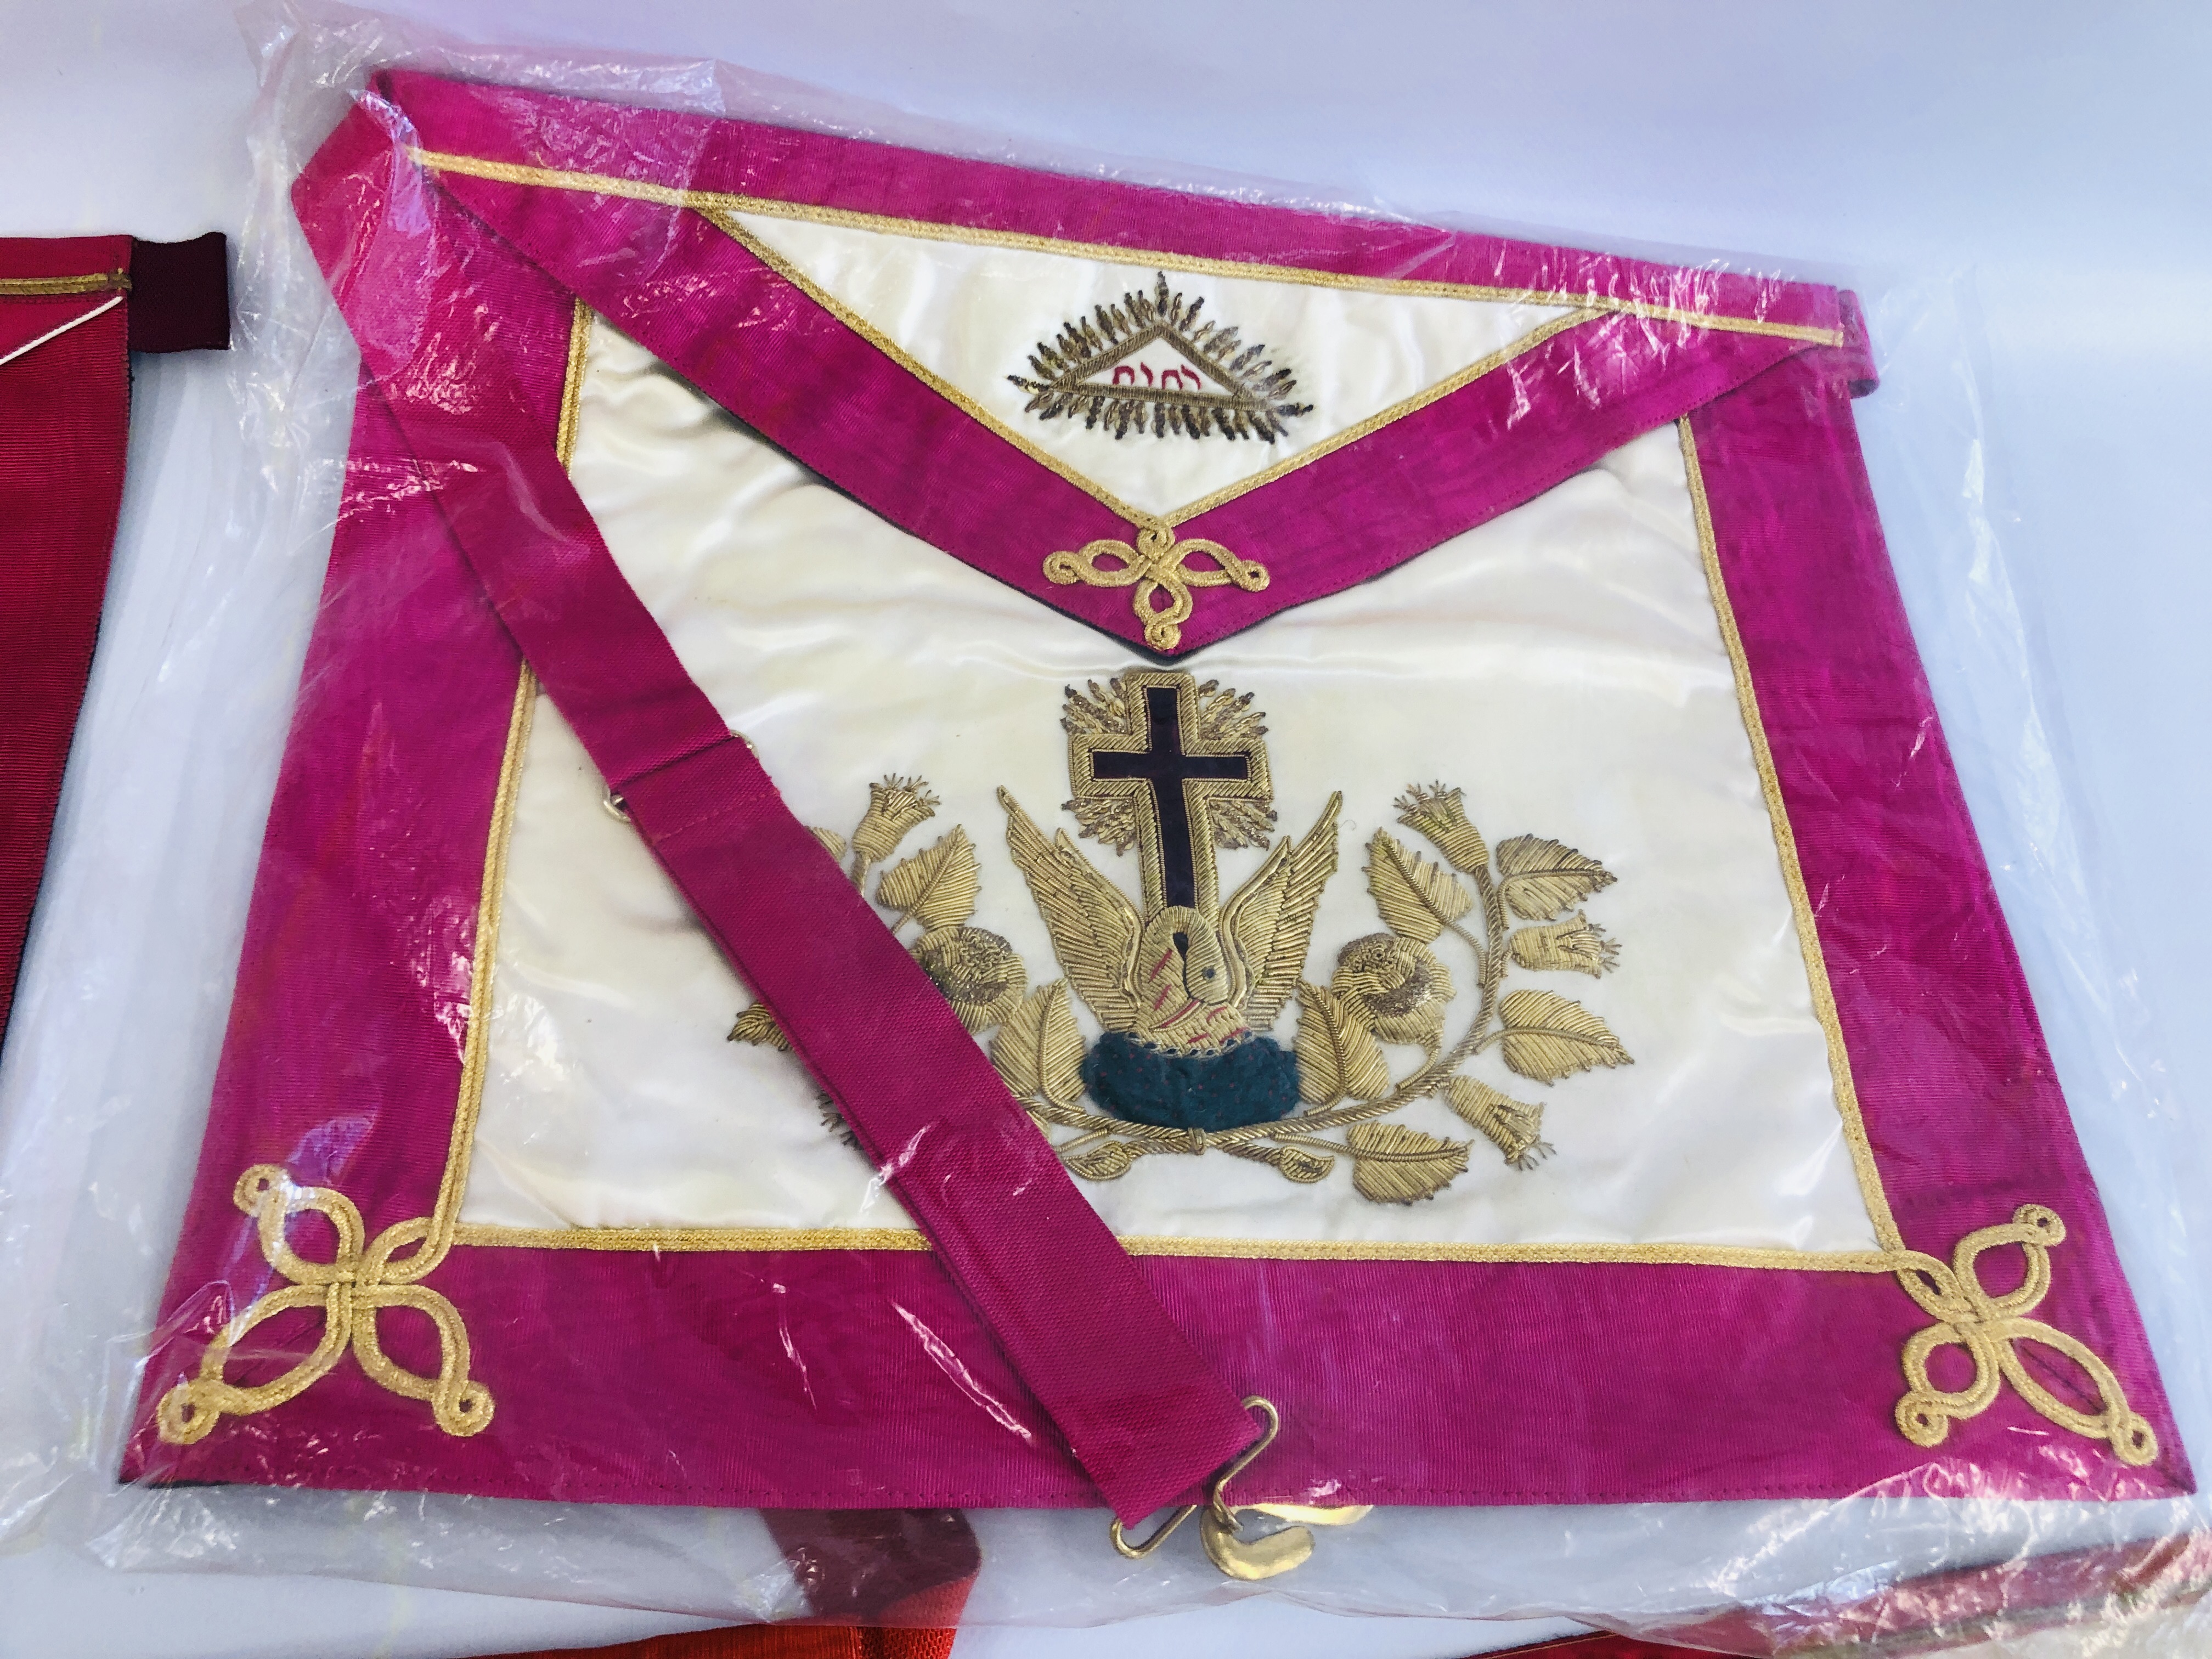 A GROUP OF 8 ELABORATE VINTAGE MASONIC APRONS. - Image 9 of 9